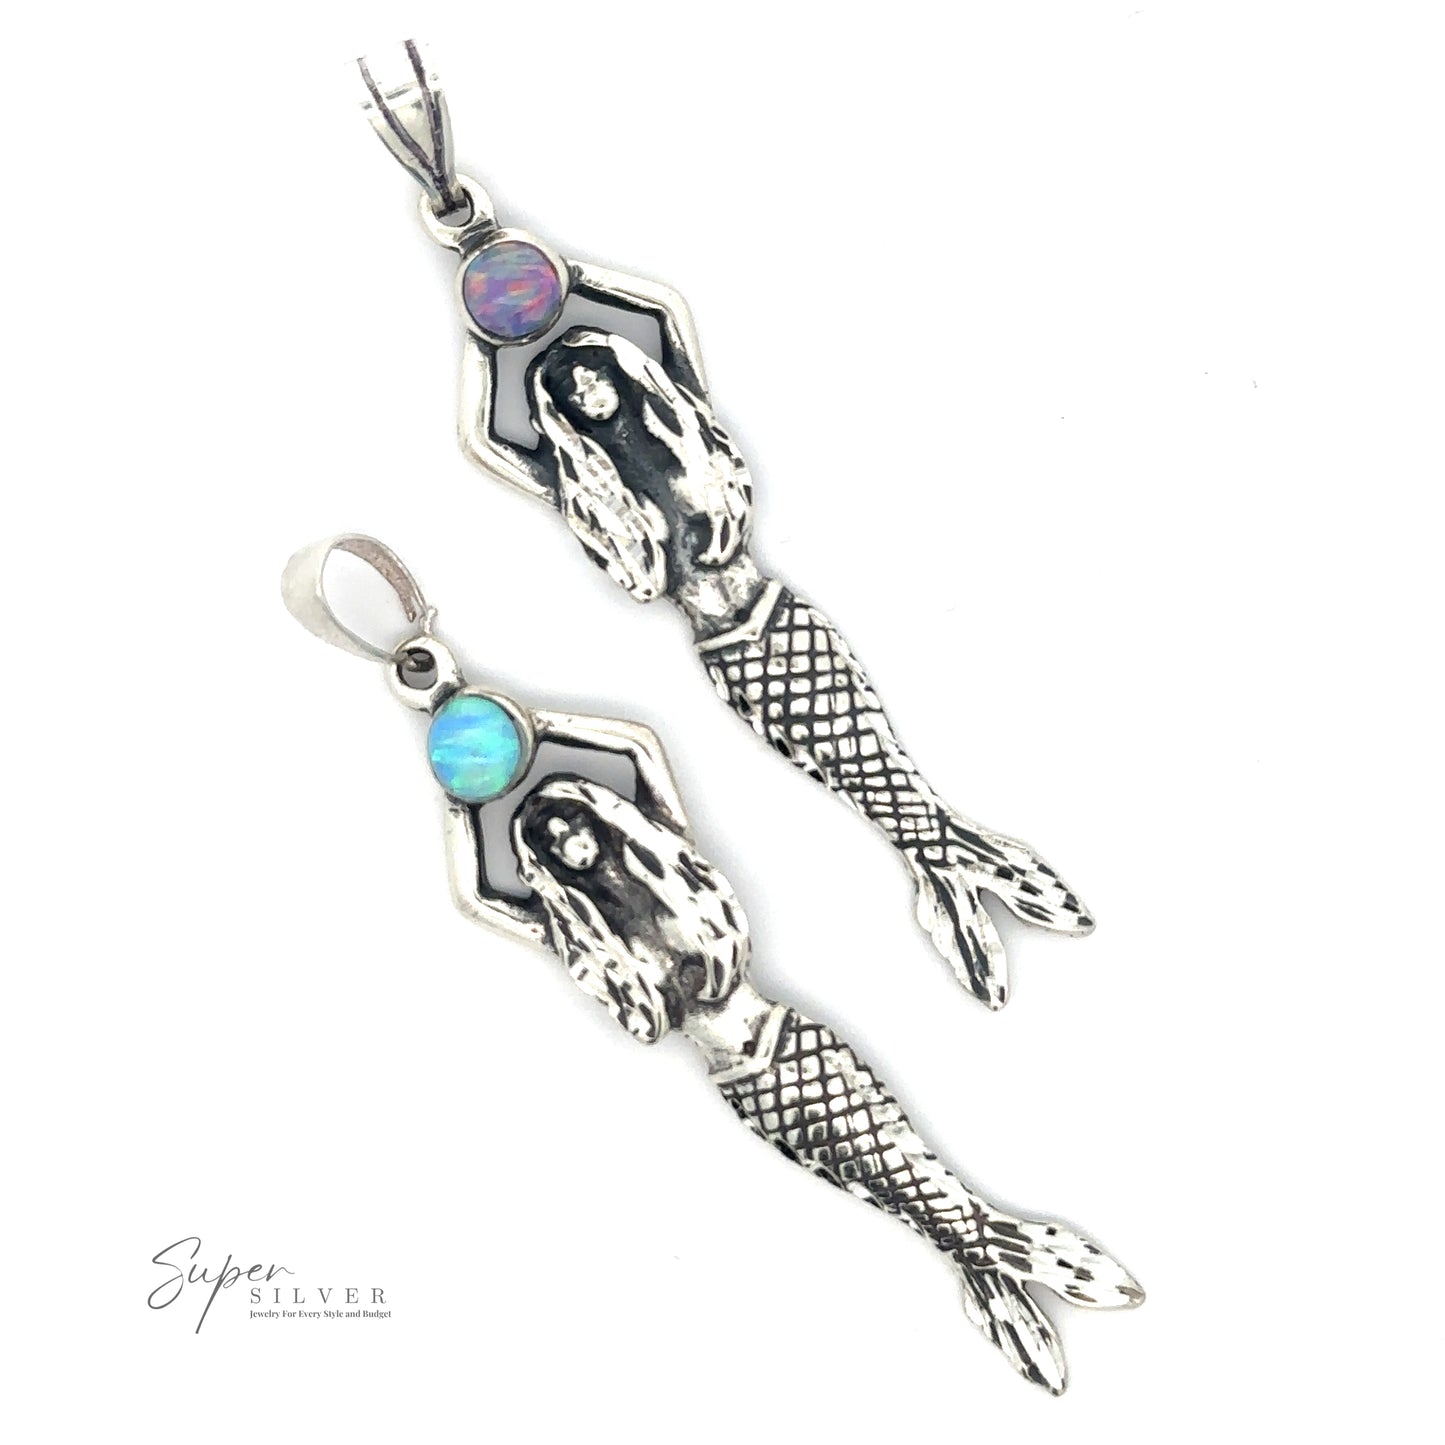 
                  
                    Two silver Mermaid And Opal Pendants crafted in oxidized silver with blue gemstones, featuring intricate tail and hair details. Mermaid And Opal Pendant design includes a silver Super logo in the bottom left corner.
                  
                